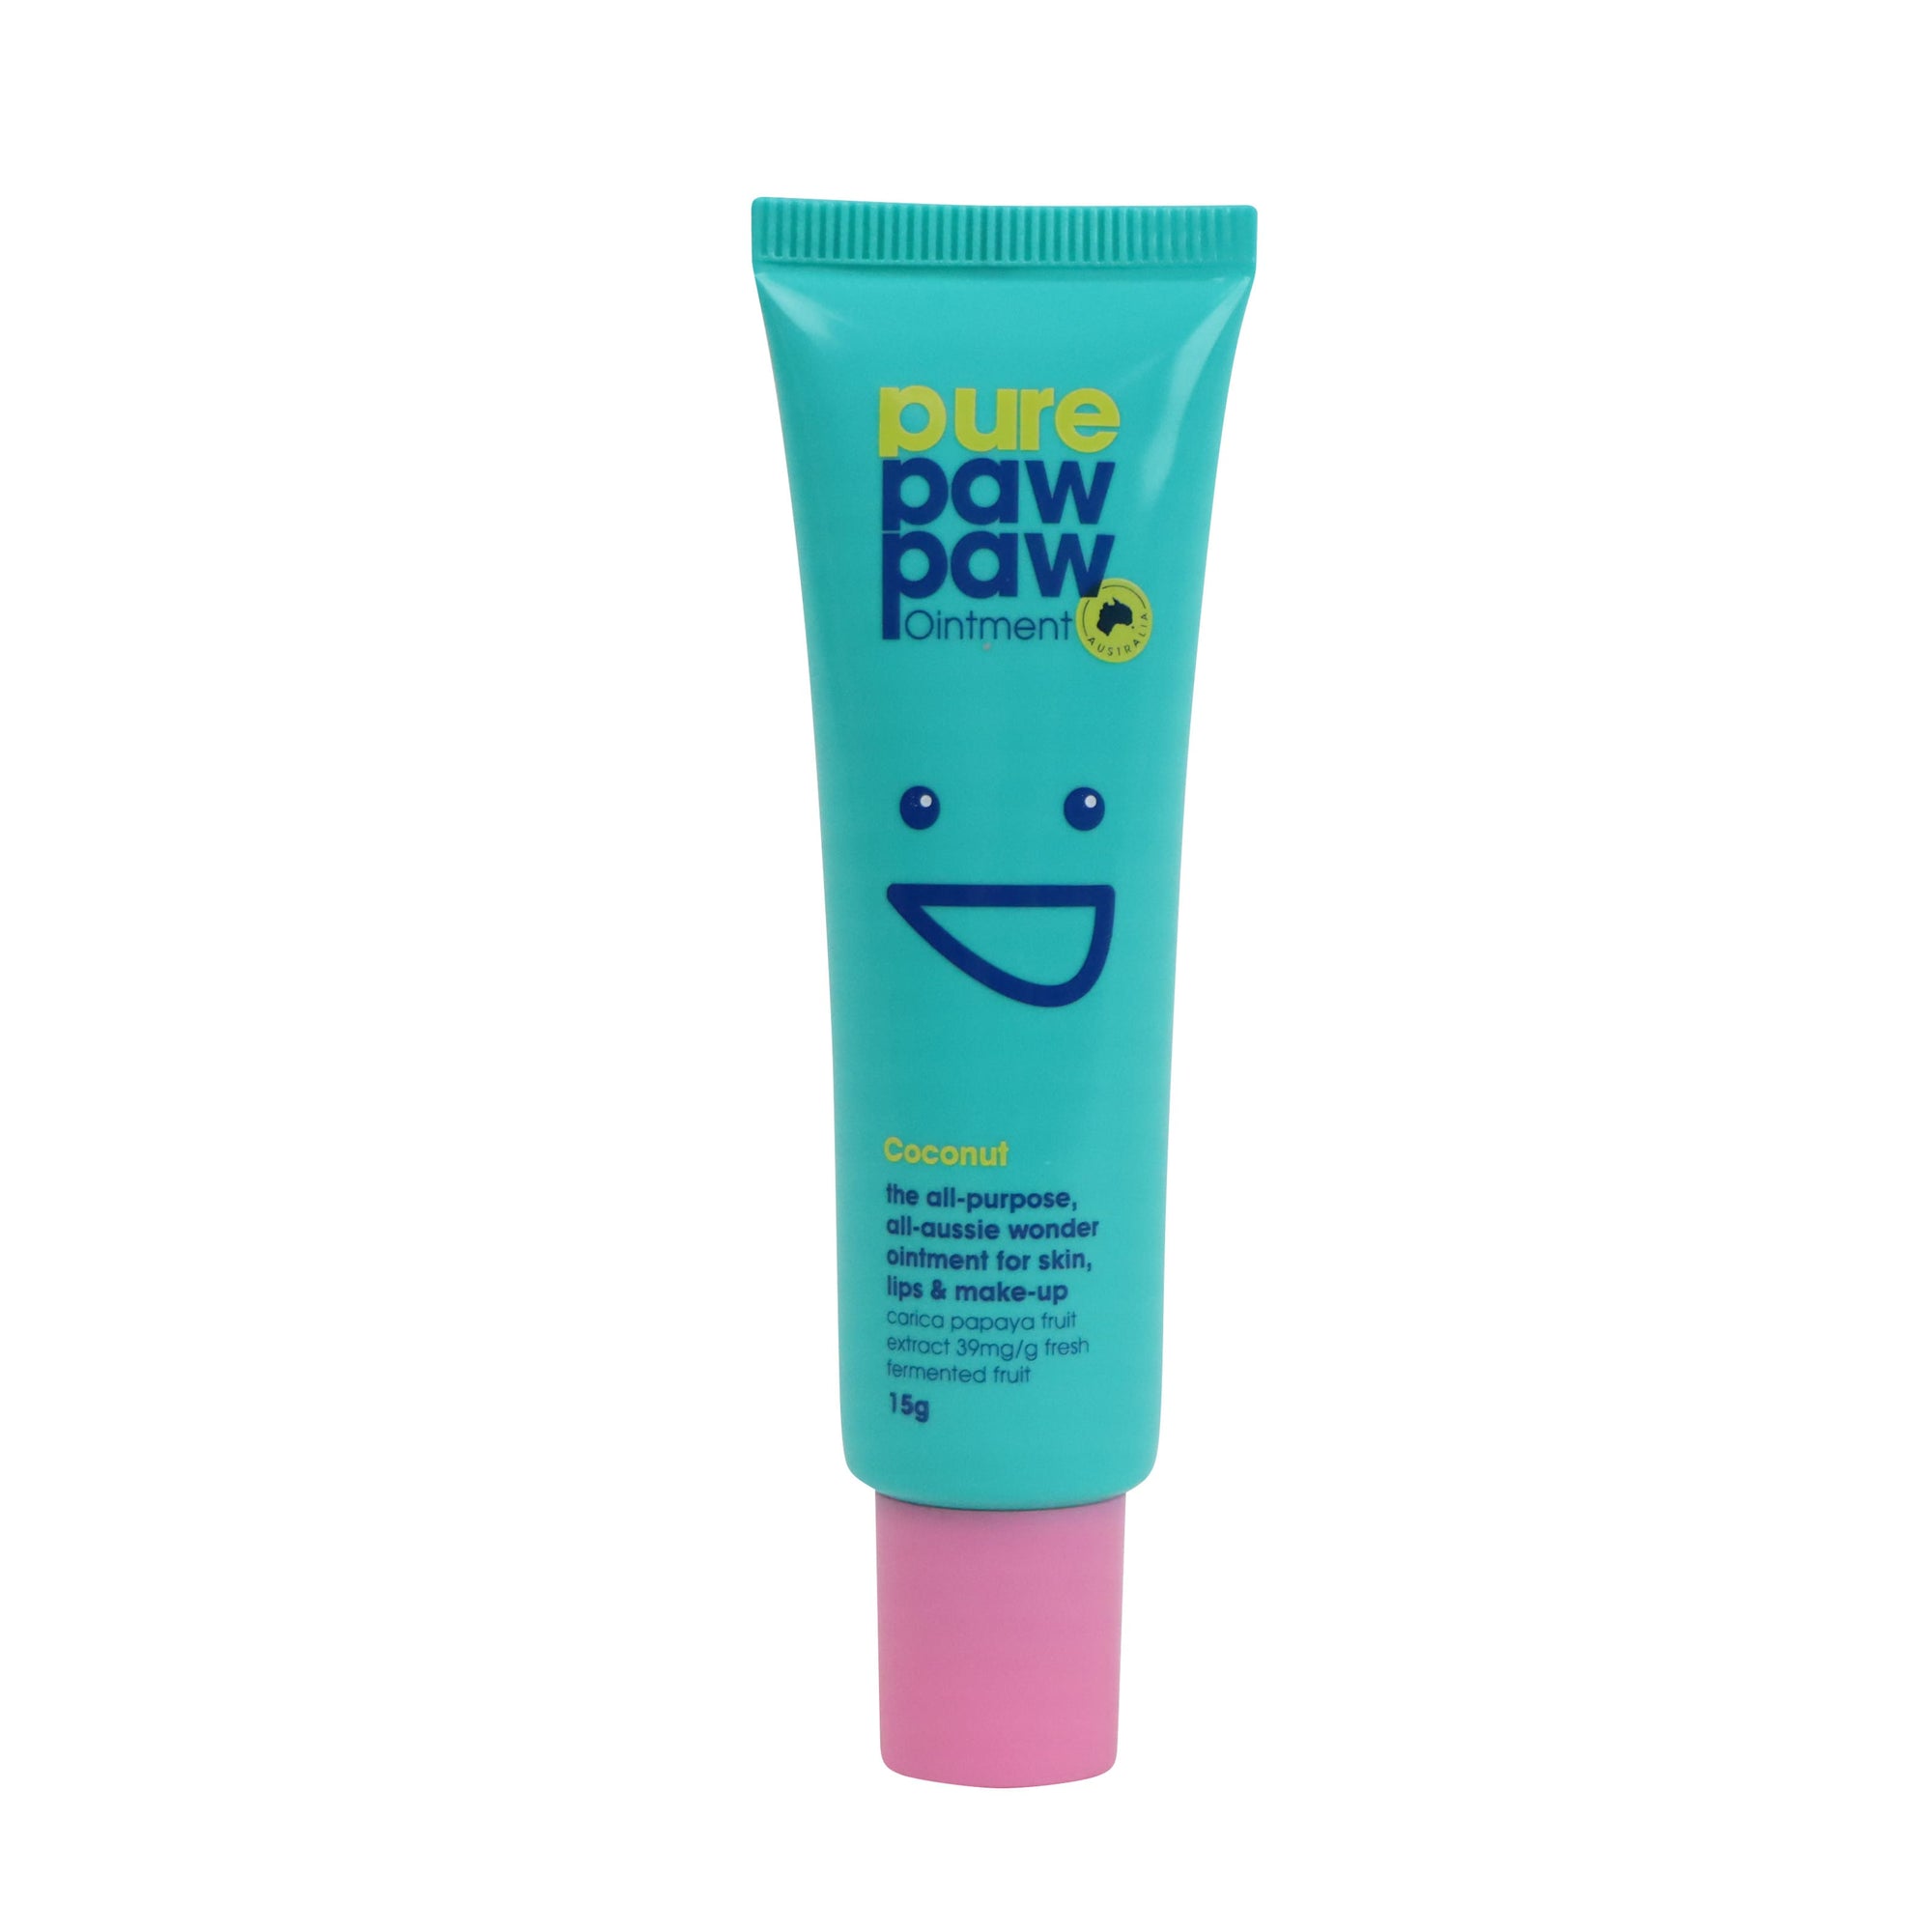 Pure Paw Paw Coconut Ointment Coconut 15g